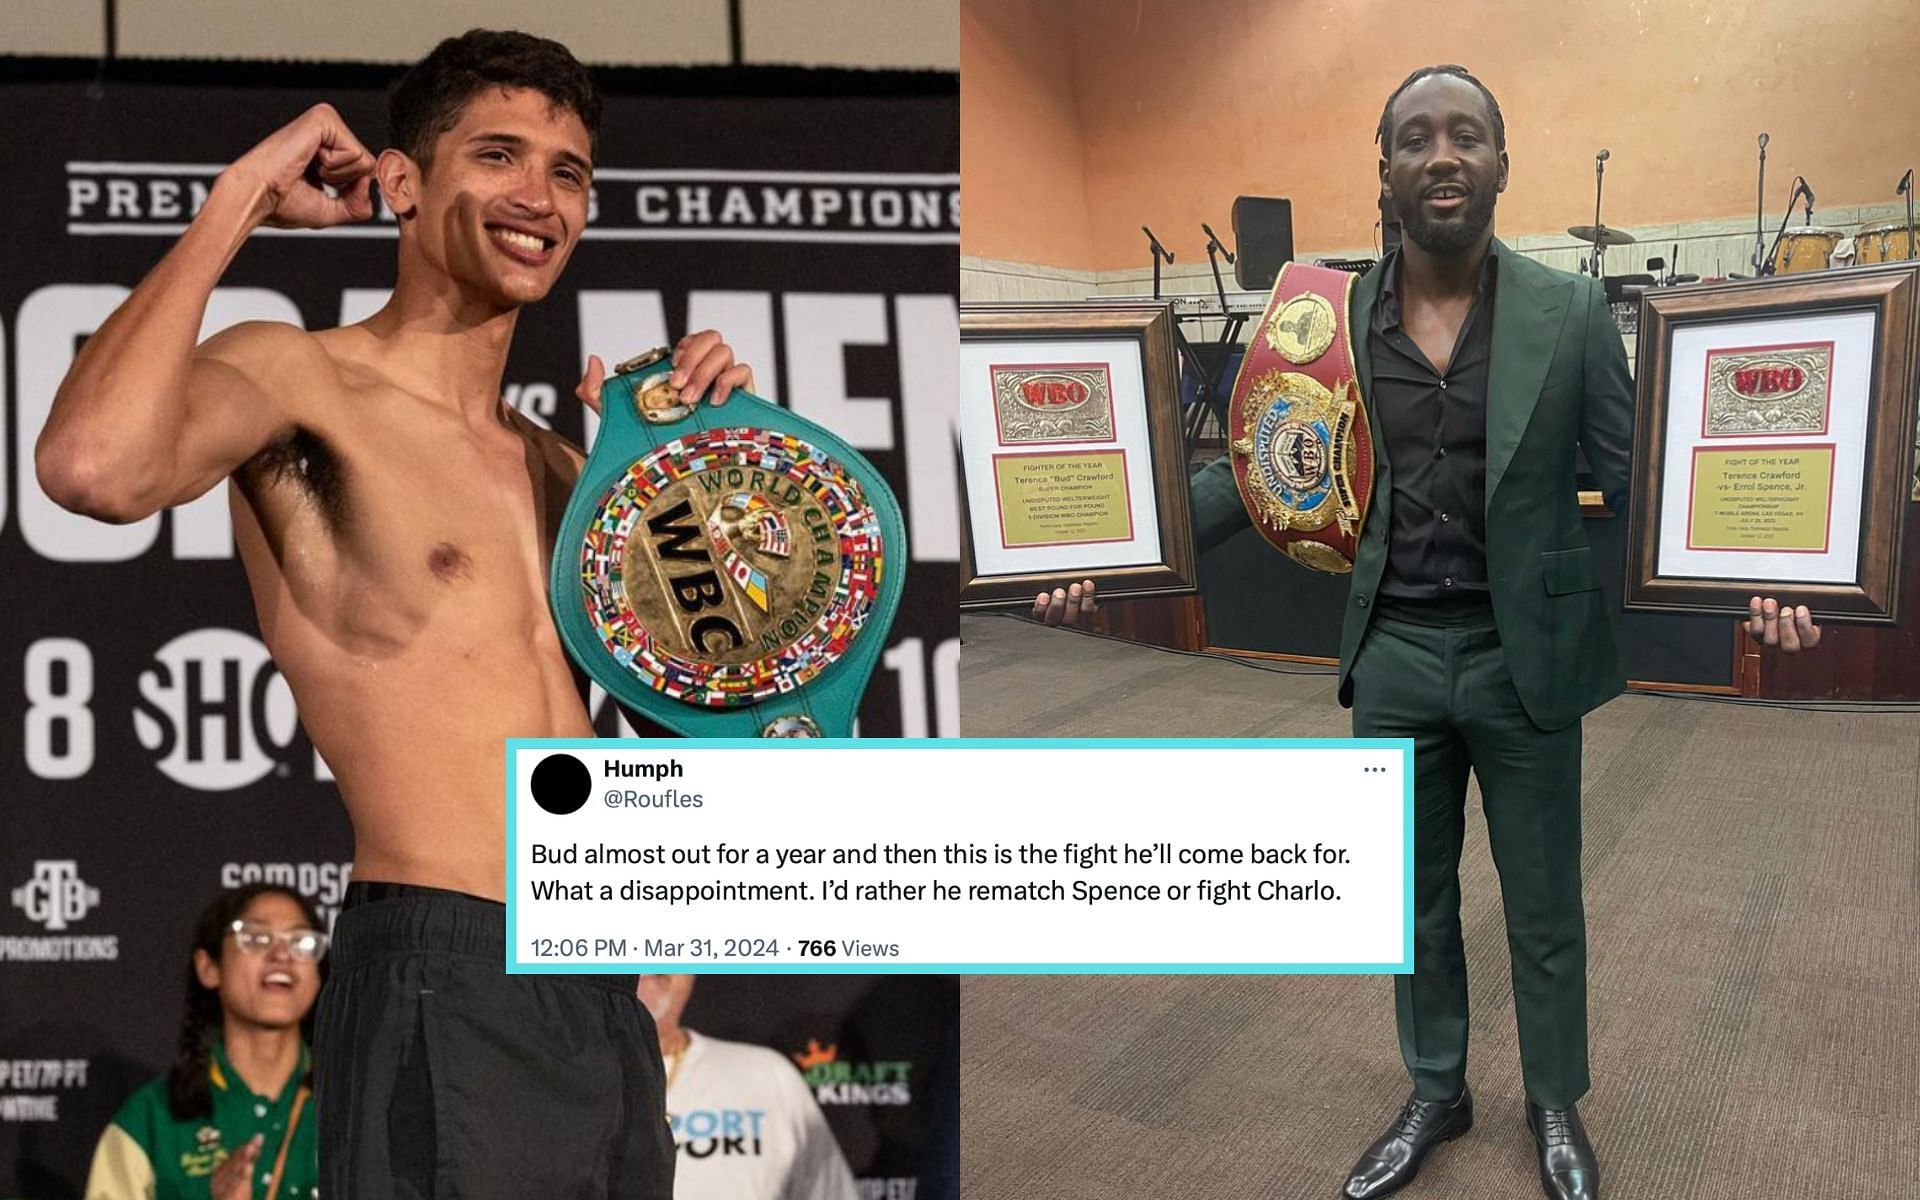 Sebastian Fundora (left) rumored to defend his title against Terence Crawford (right) [Photo Courtesy @seb_fundora and @tbudcrawford on Instagram]